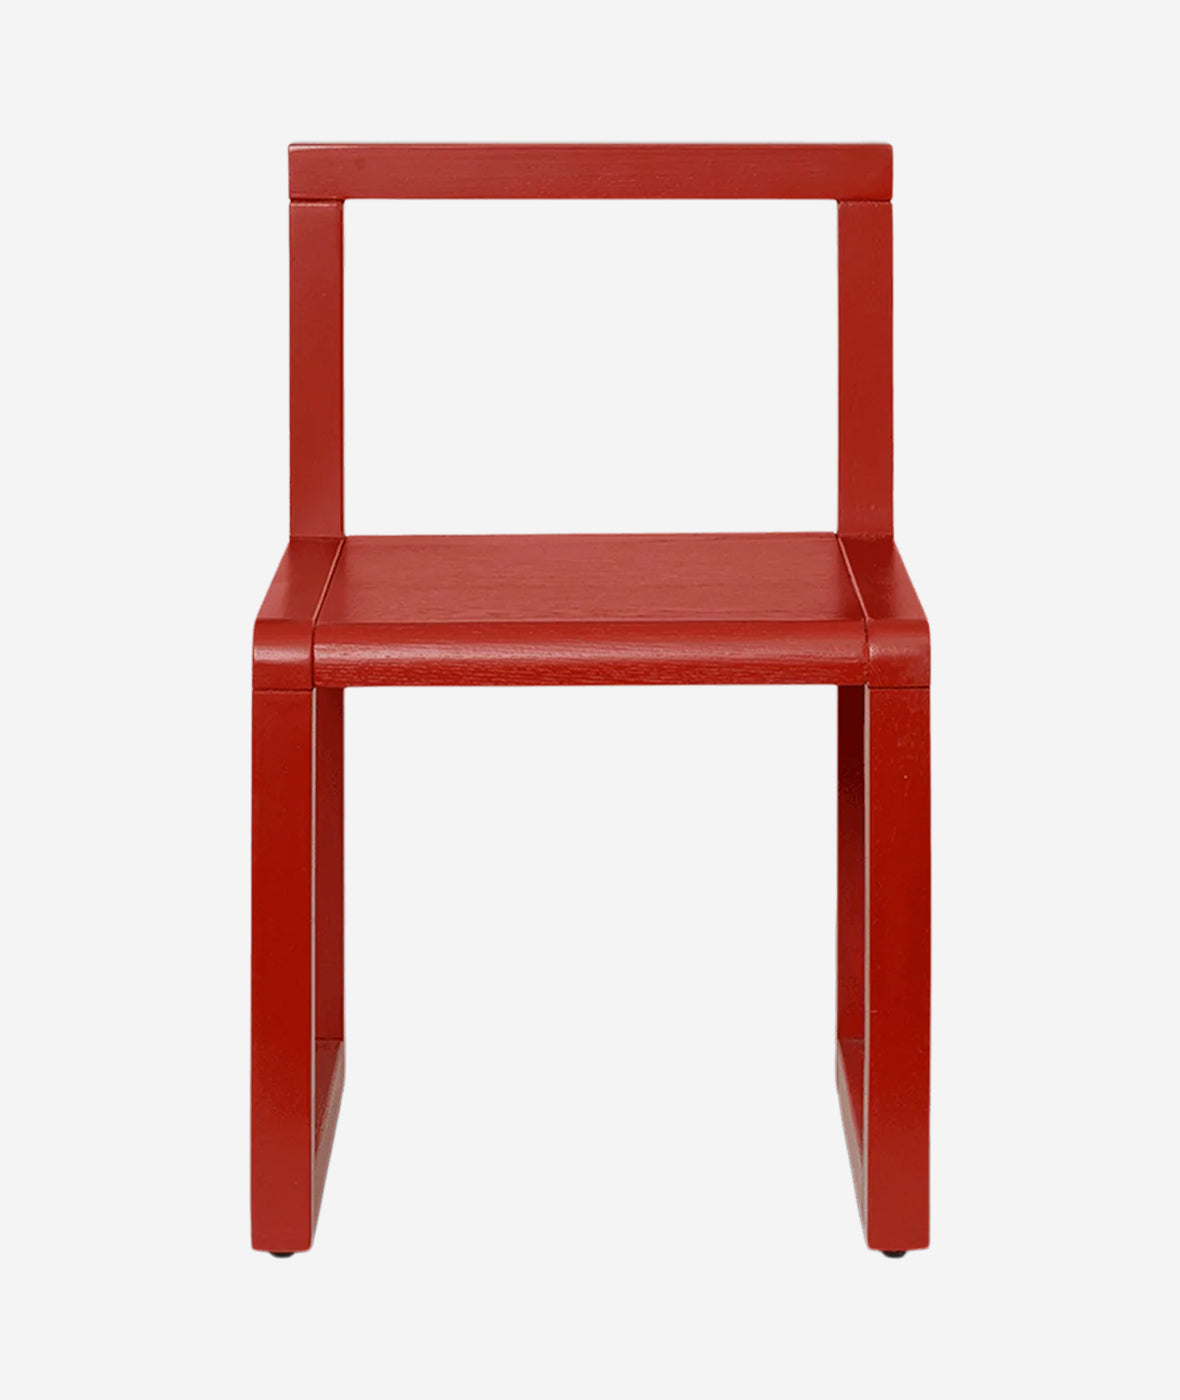 Little Architect Chair - More Options